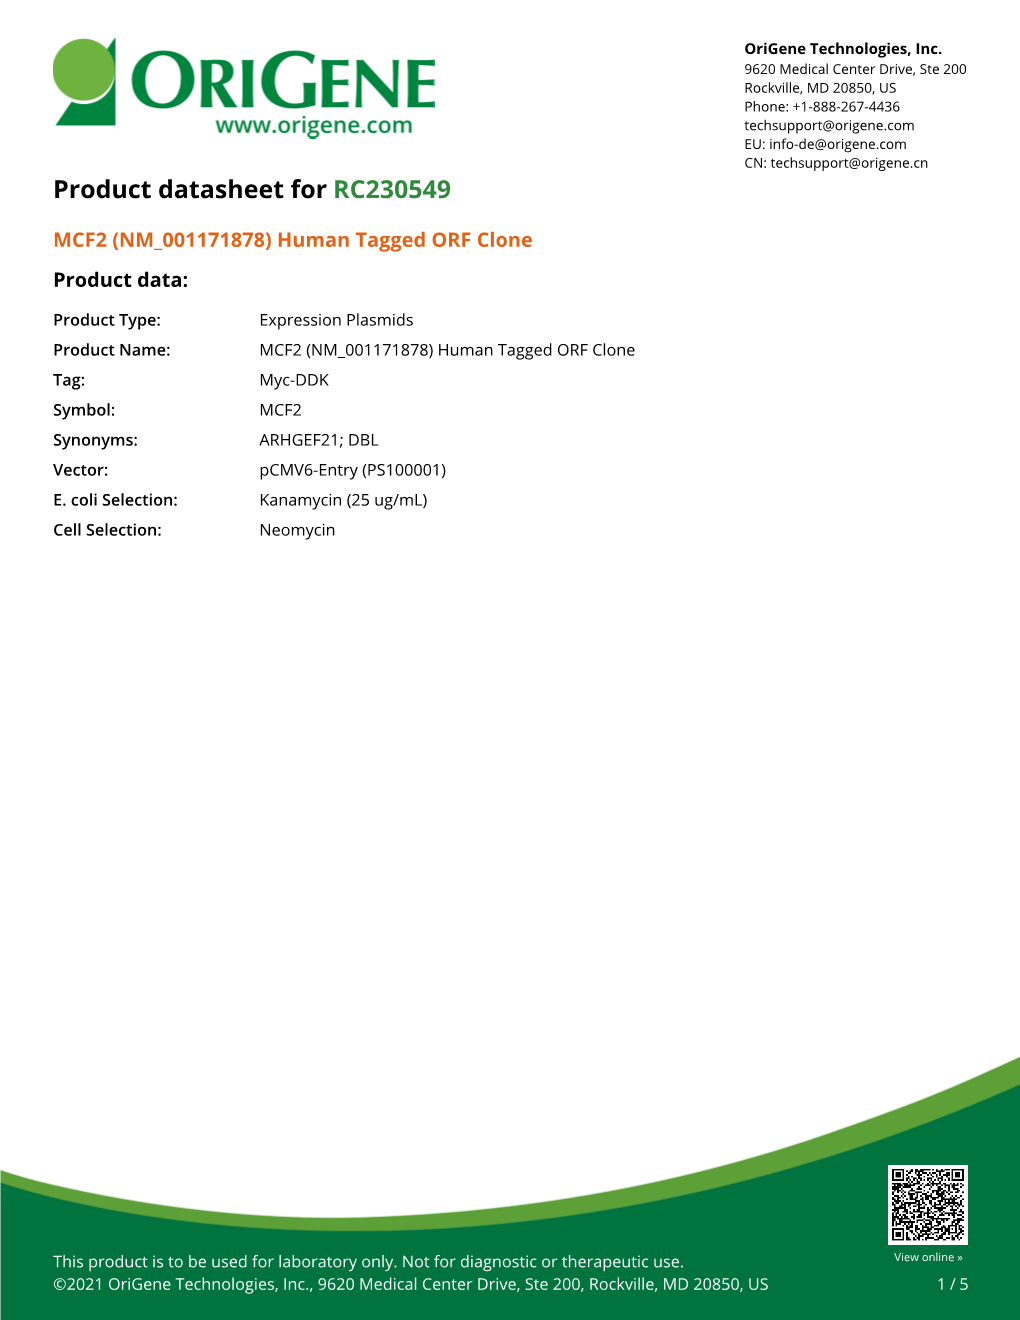 MCF2 (NM 001171878) Human Tagged ORF Clone Product Data